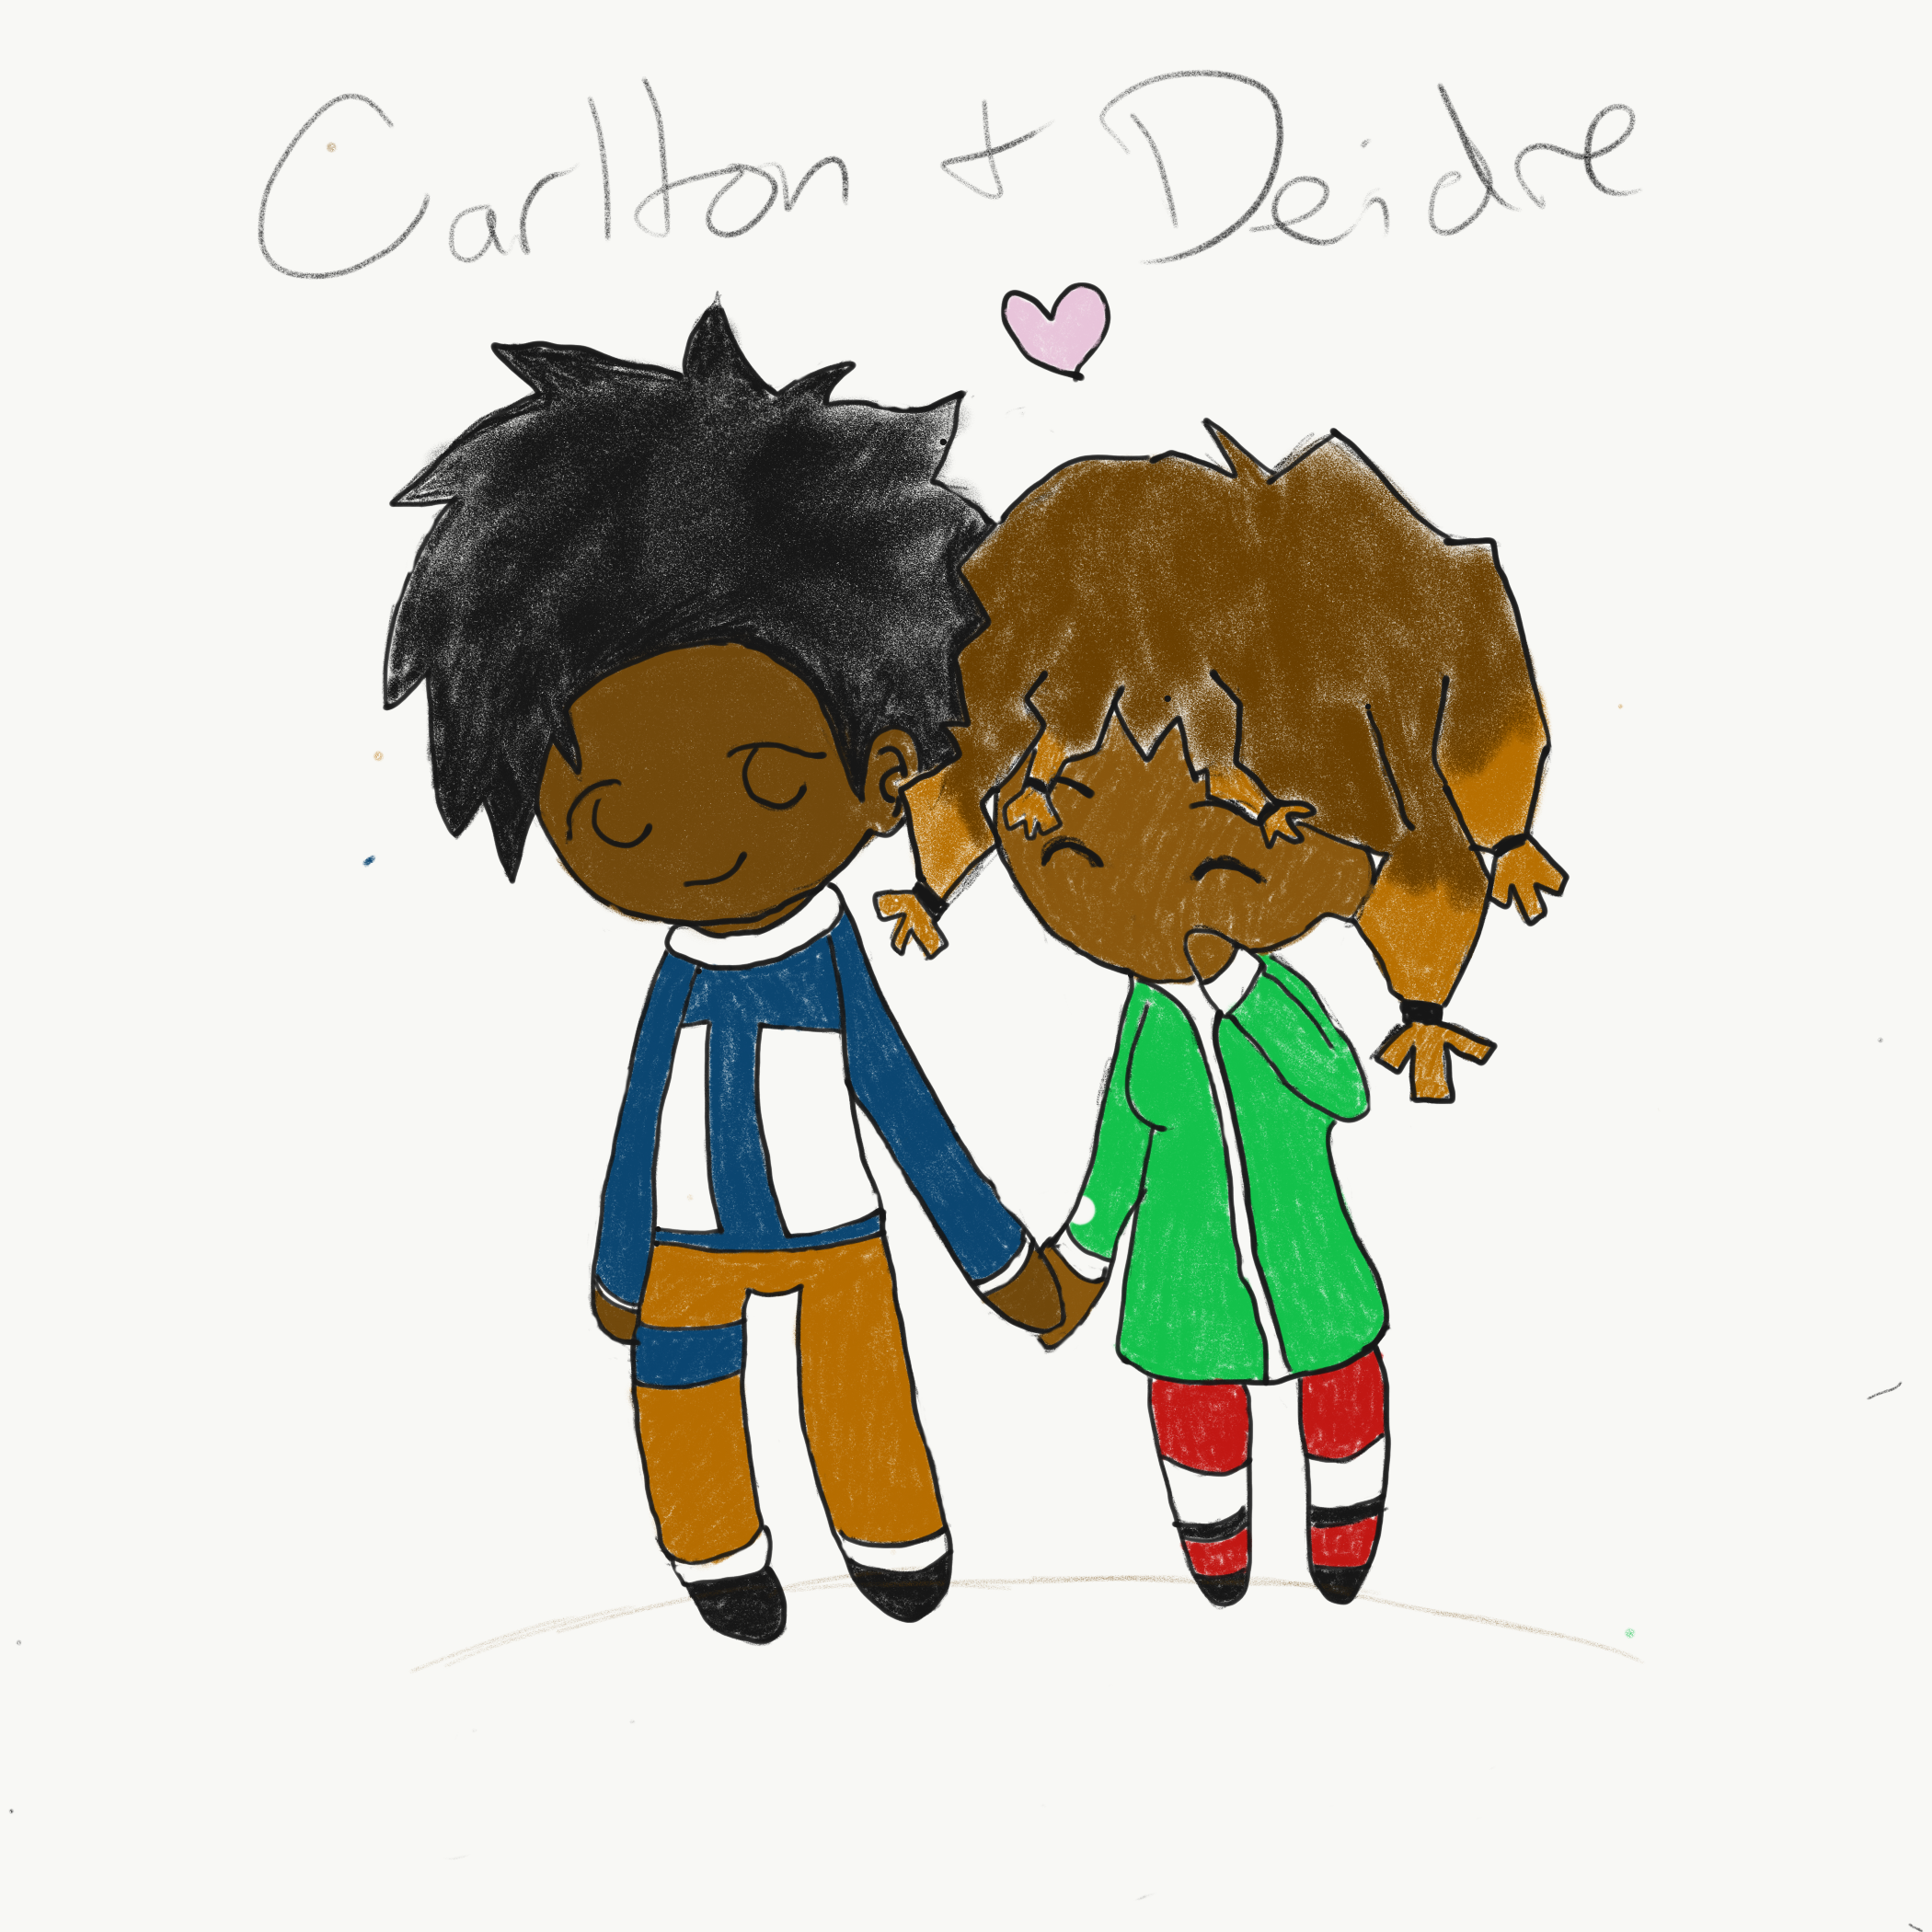 Deidre and I as Chibi Anime Characters